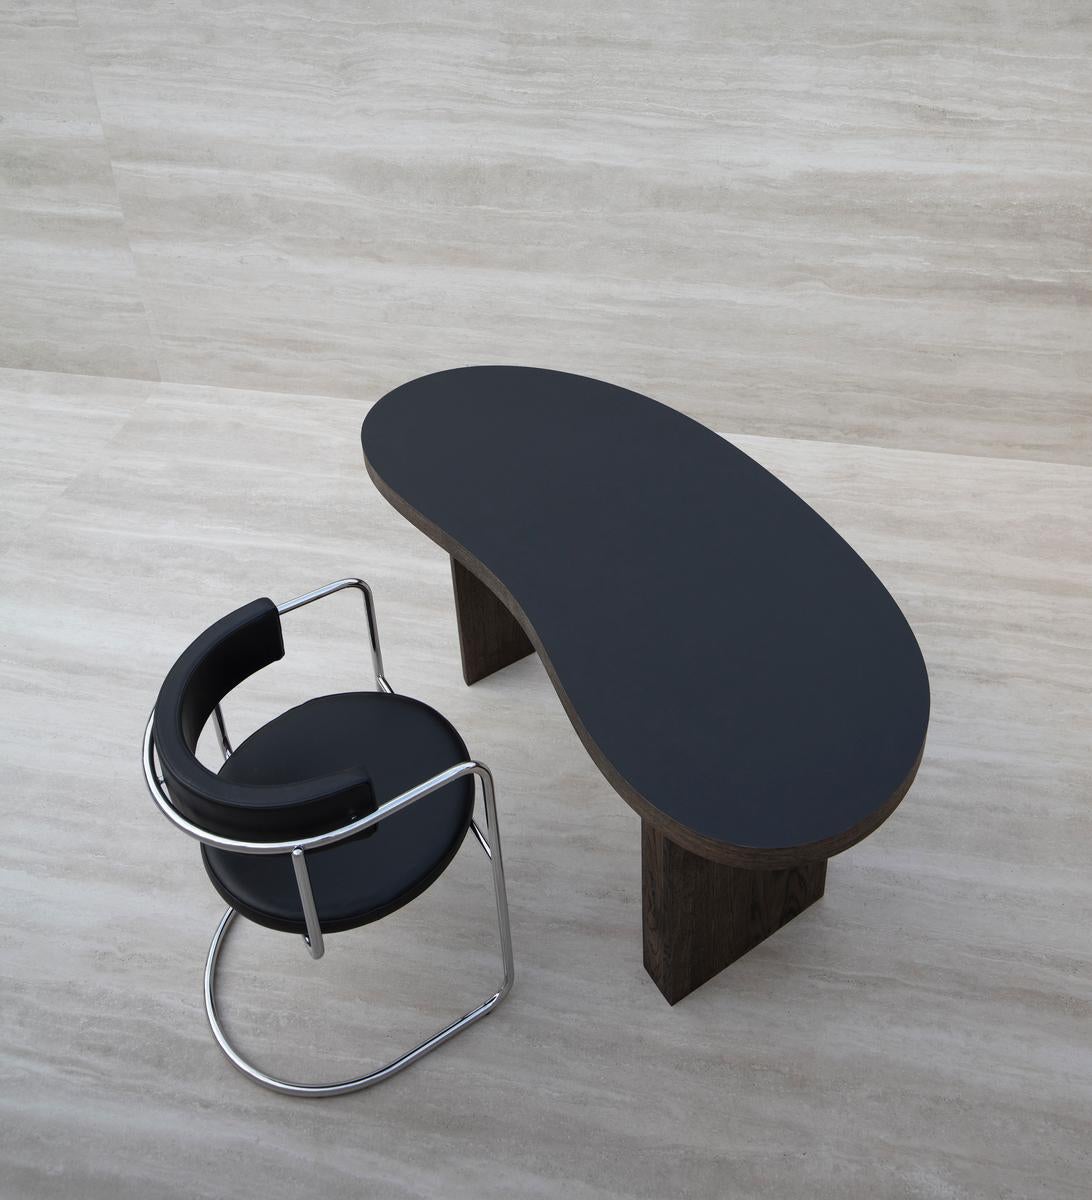 Organic Modern Contemporary Desk Table 'Ms Bean', Smoked Oak, Black Tabletop For Sale